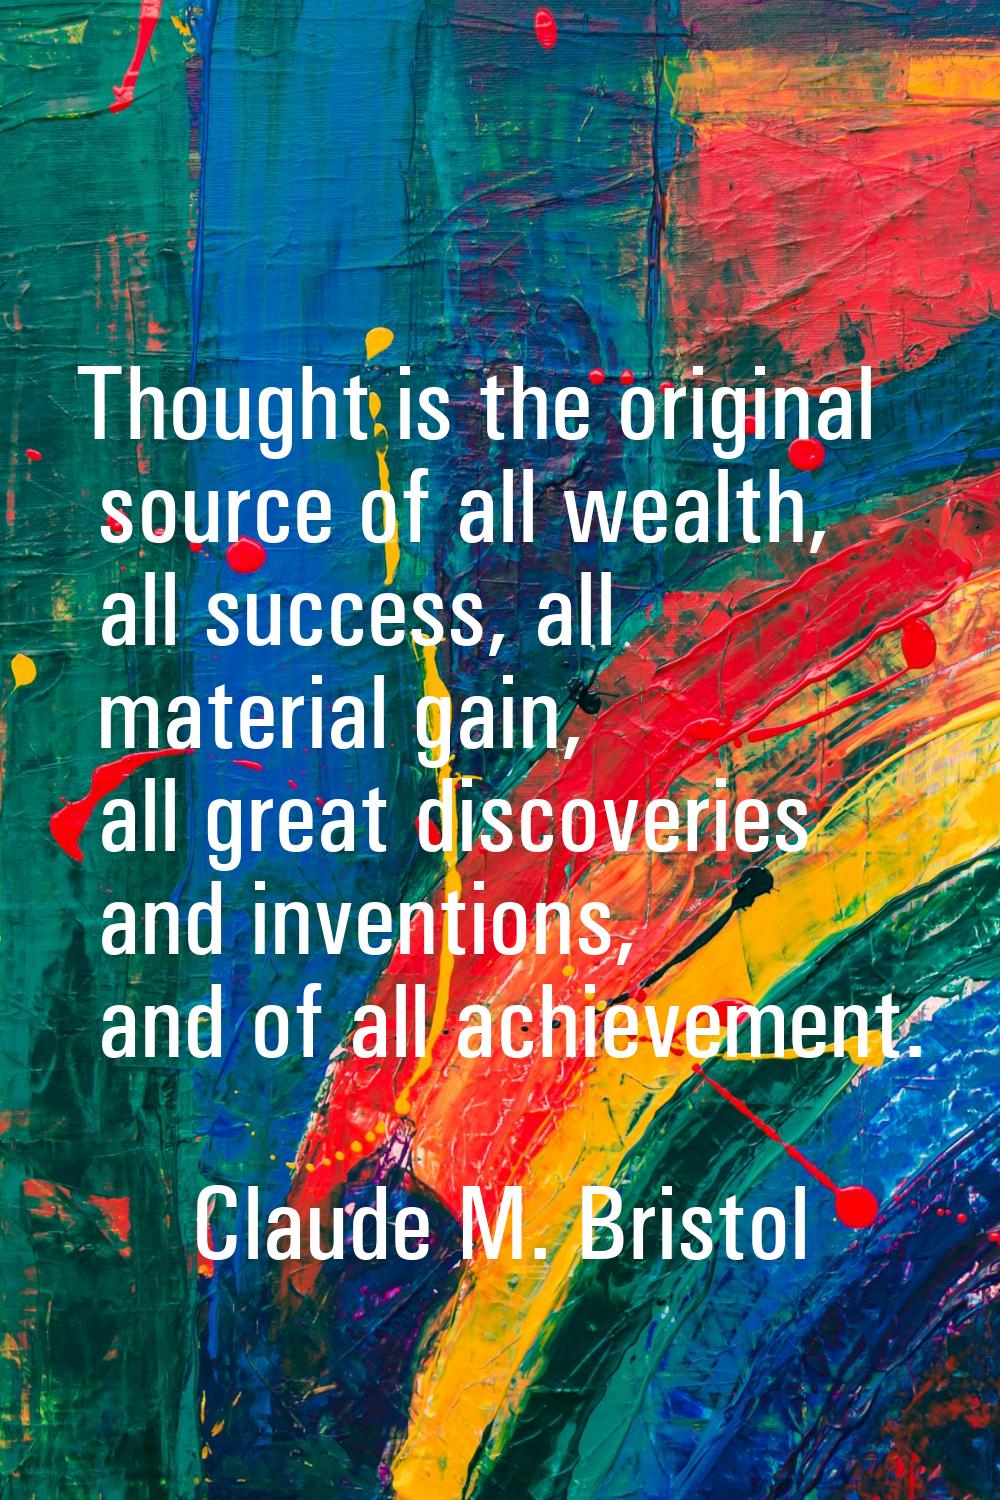 Thought is the original source of all wealth, all success, all material gain, all great discoveries